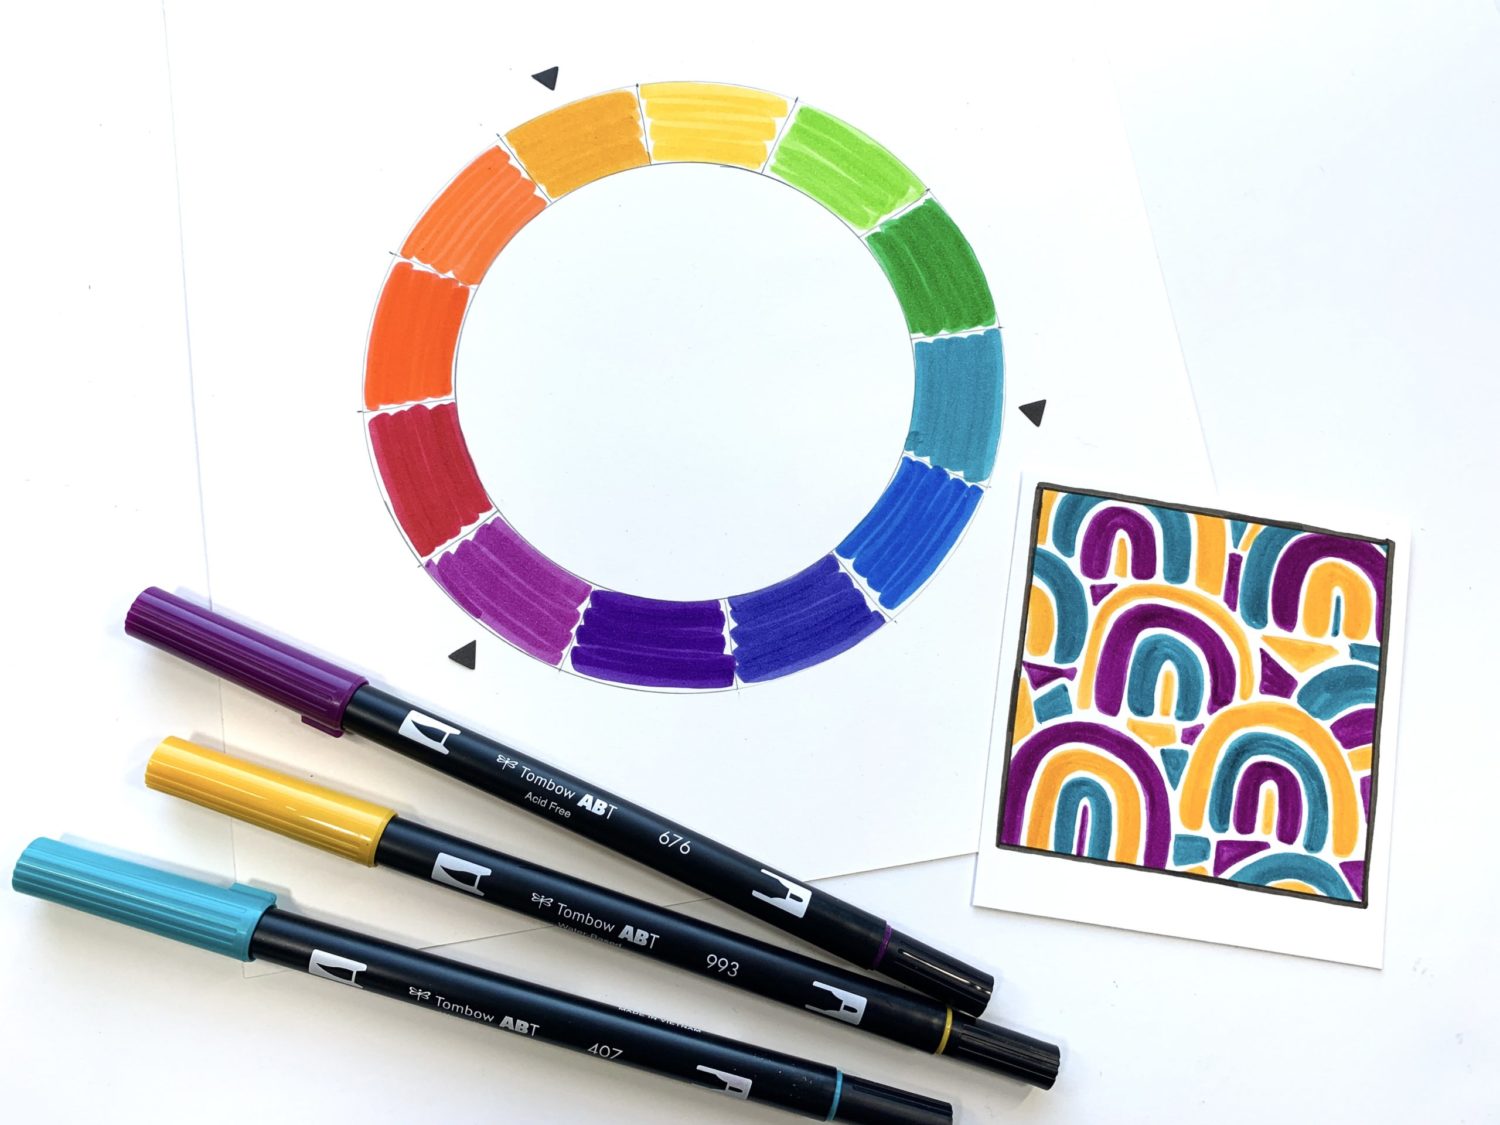 Make your own Fall color palettes with @tombowusa! Color guide by Ali LePere. #dualbrushpens #autumninspiration #tombow